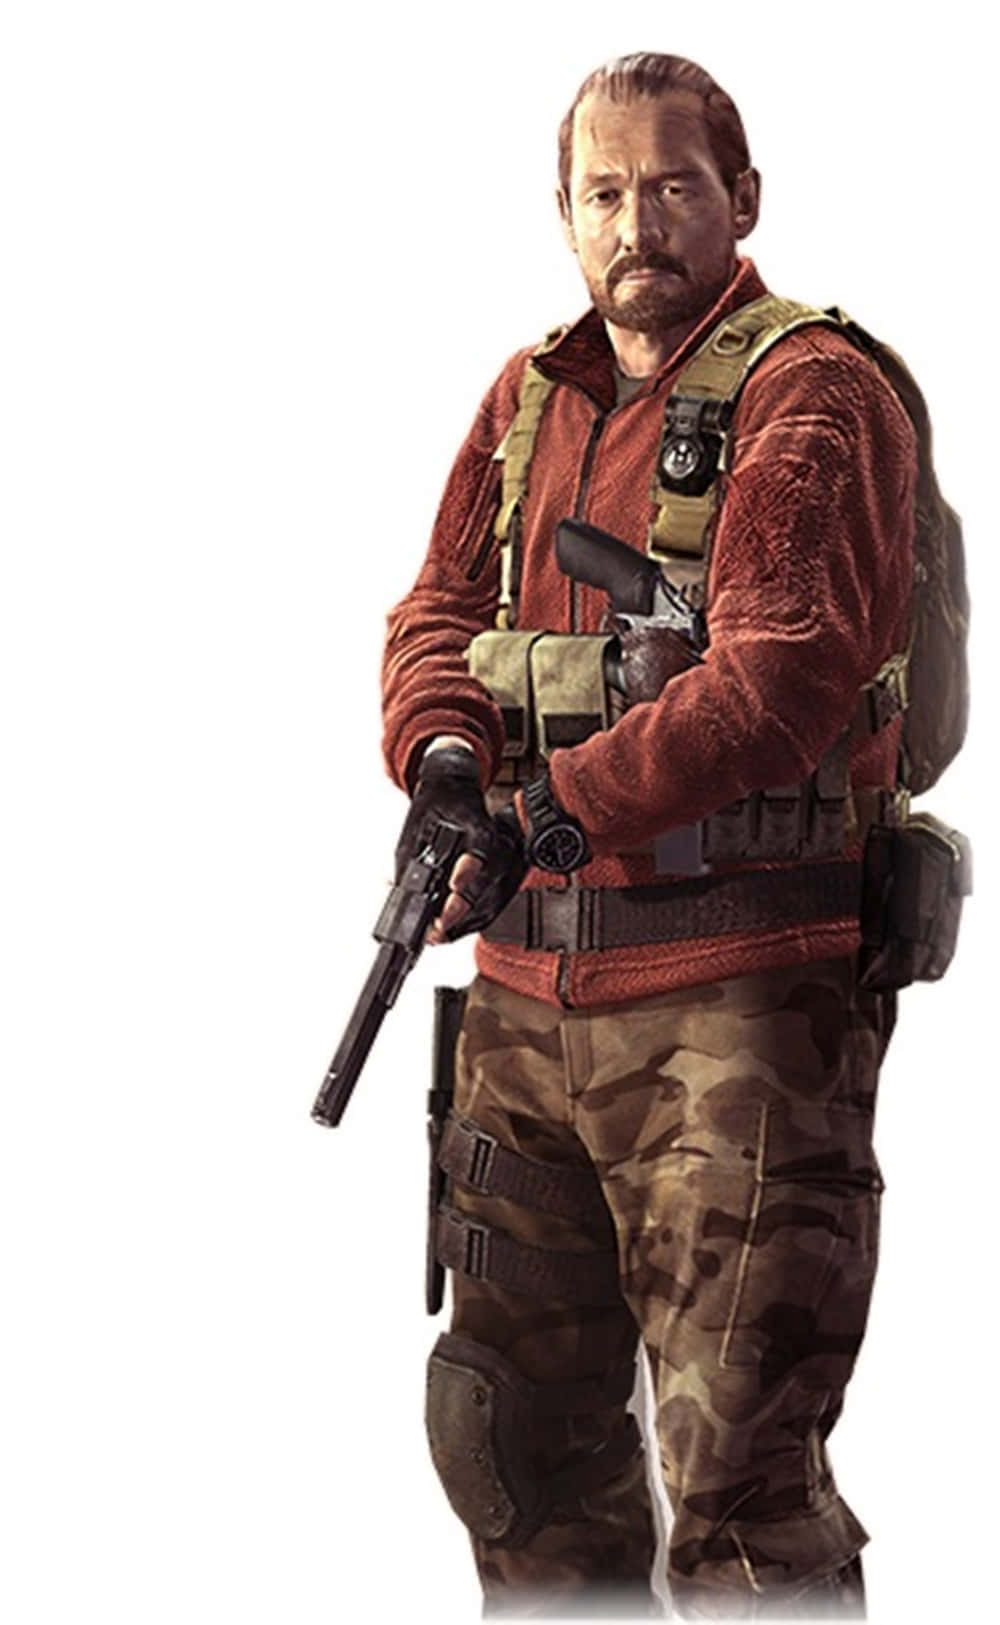 Caption: Barry Burton From Resident Evil In Action Wallpaper